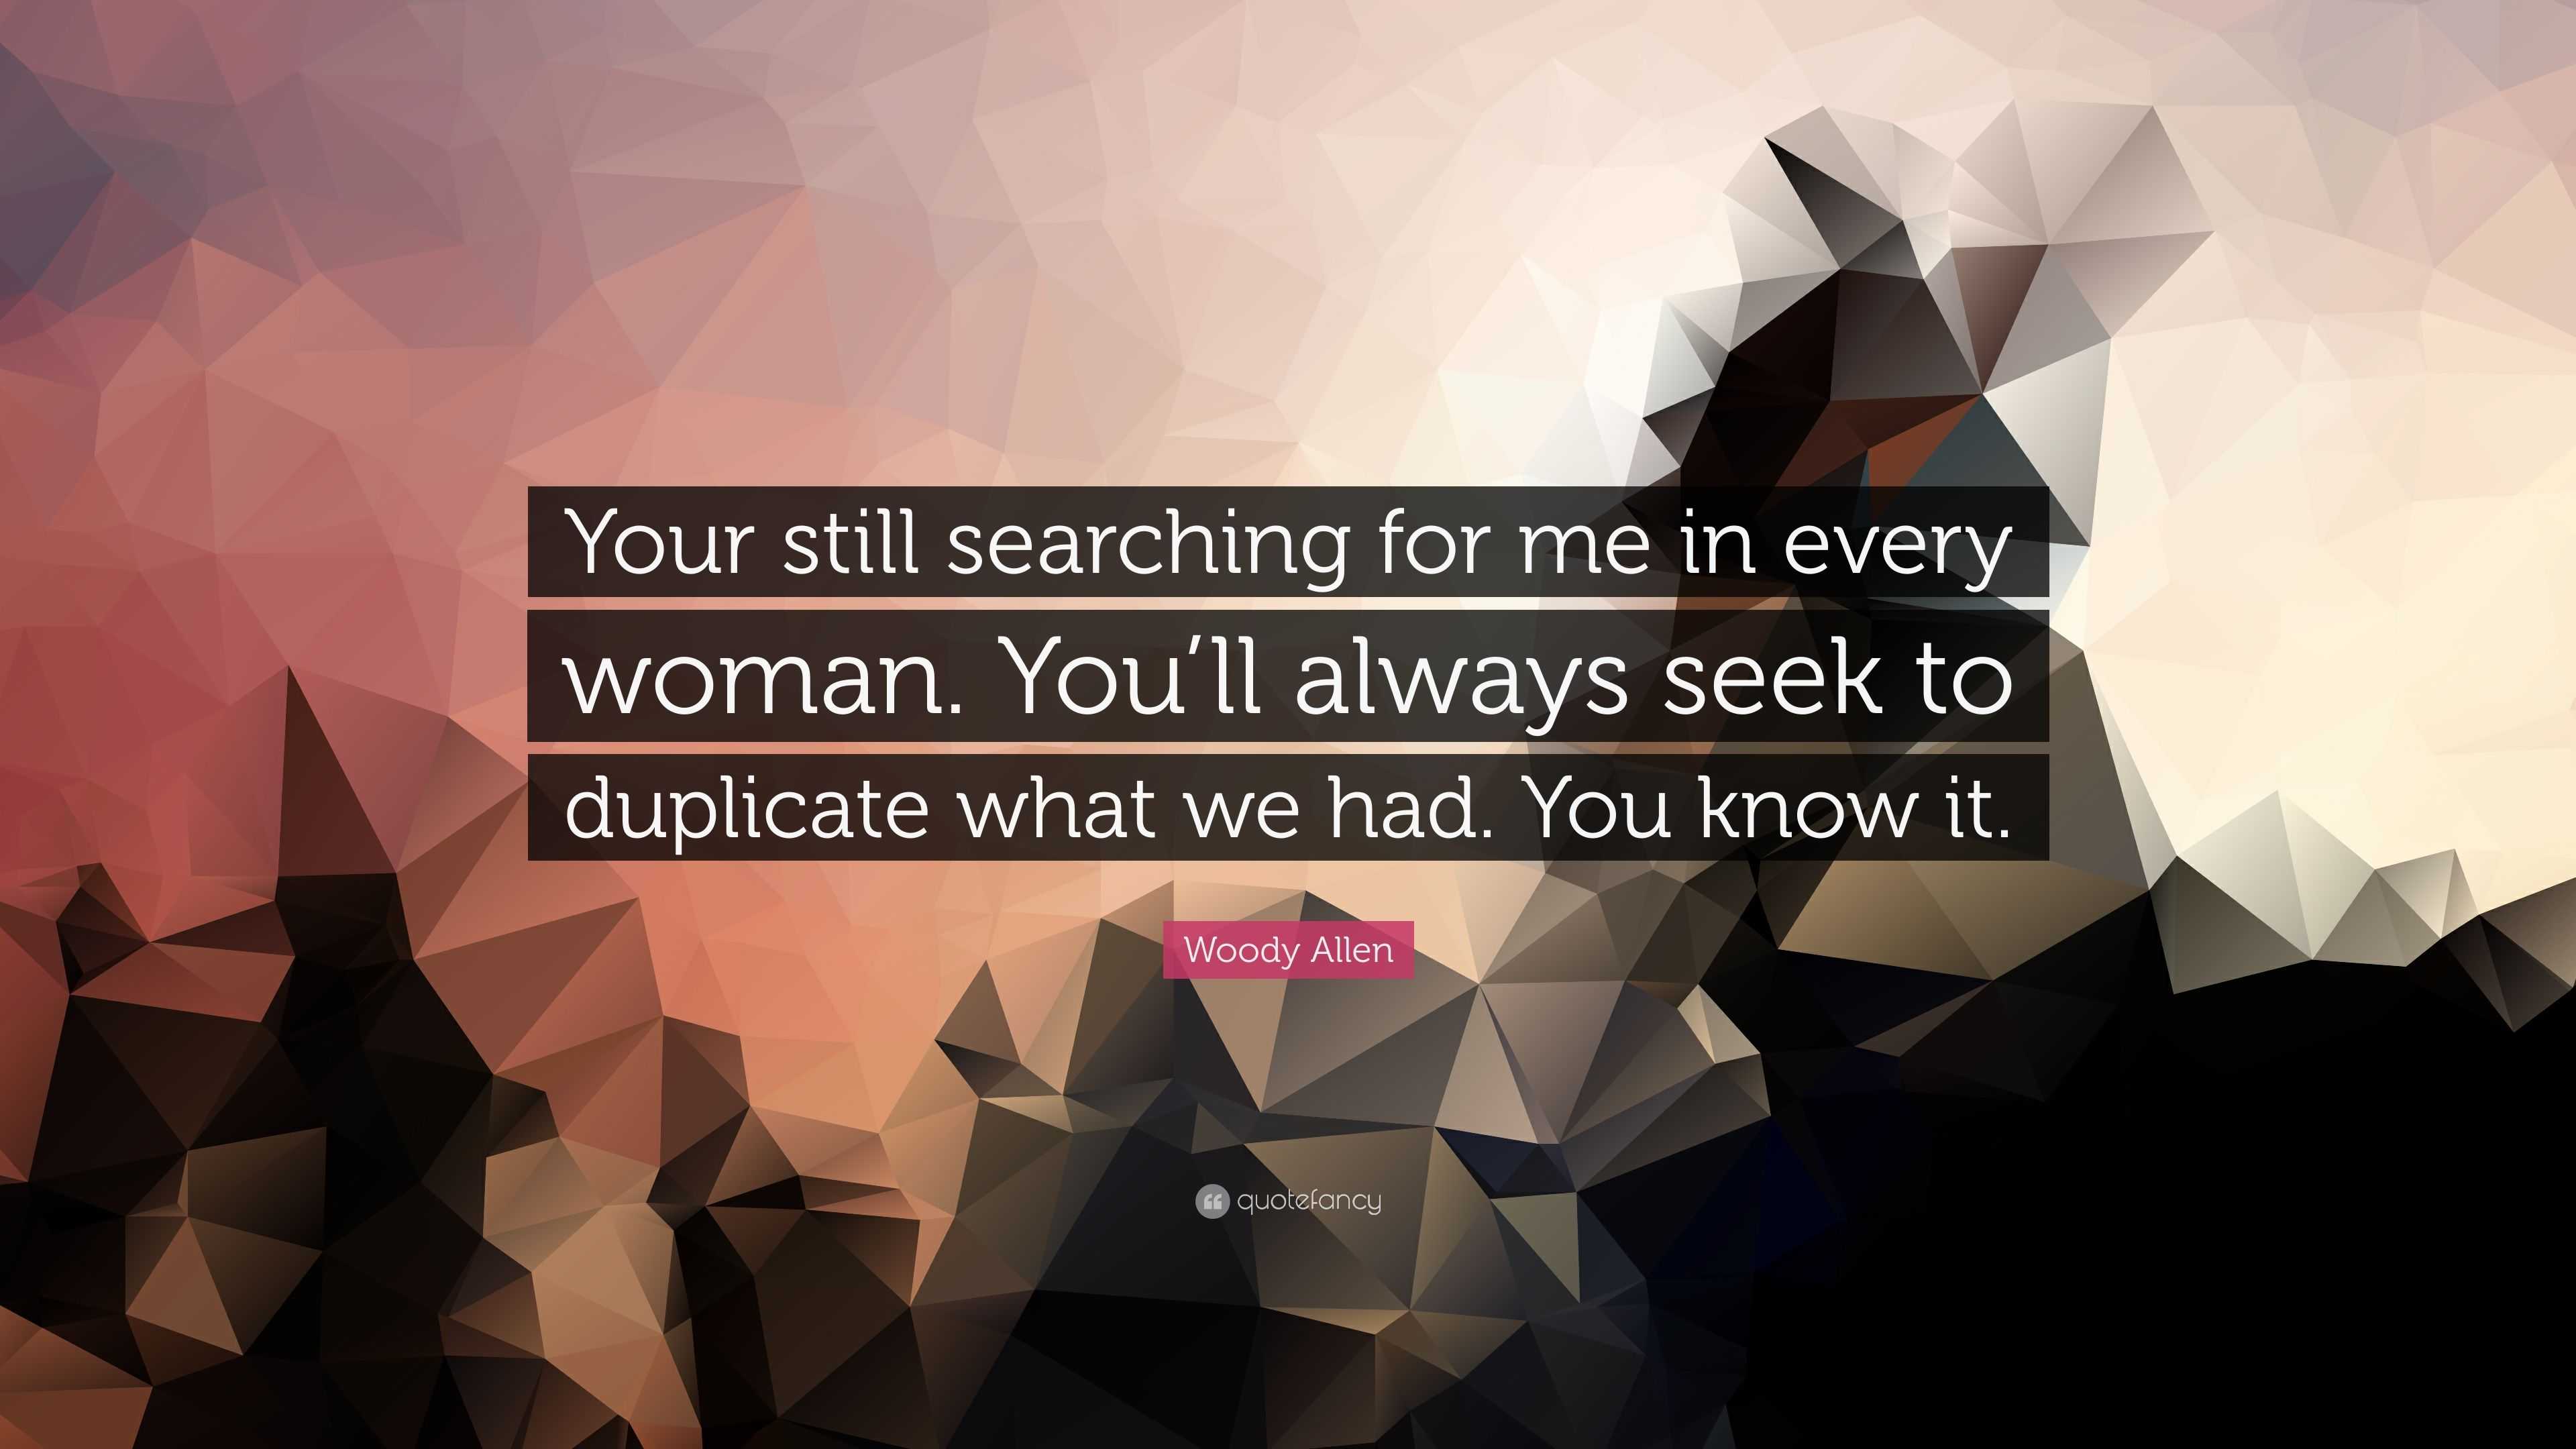 You're still searching for me in every woman